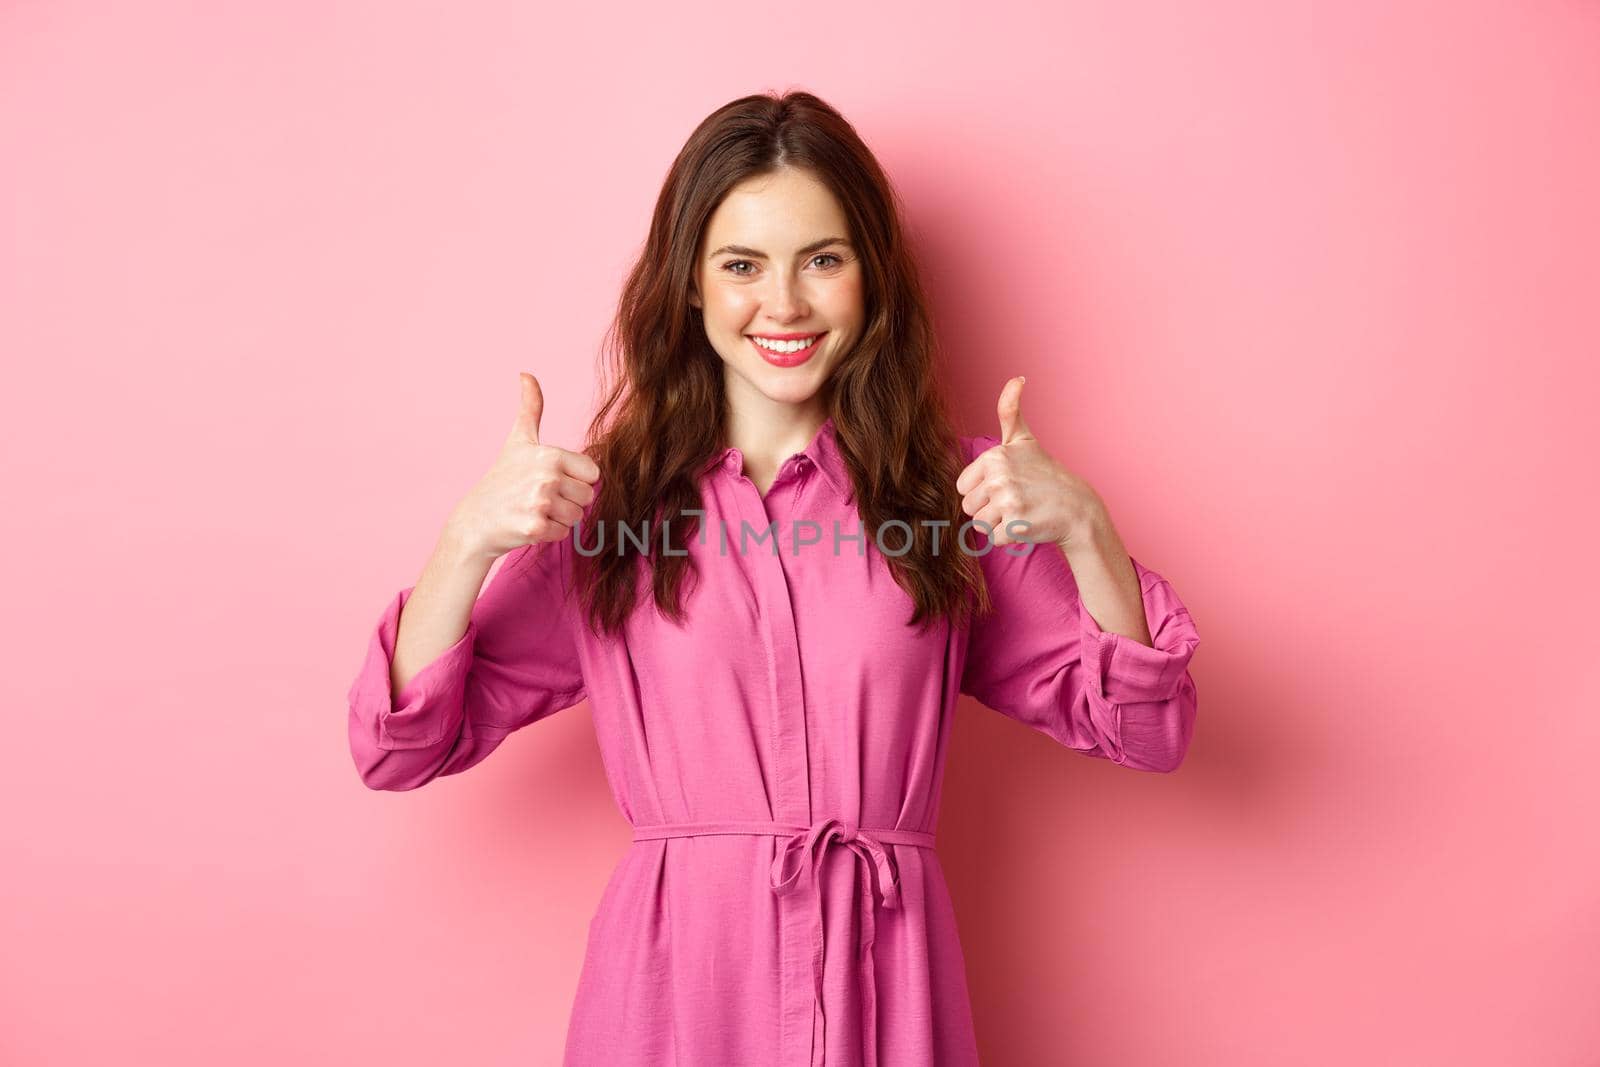 Satisfied female showing thumbs up in approval, say yes, agree and approve choice, praising you, standing against pink background.